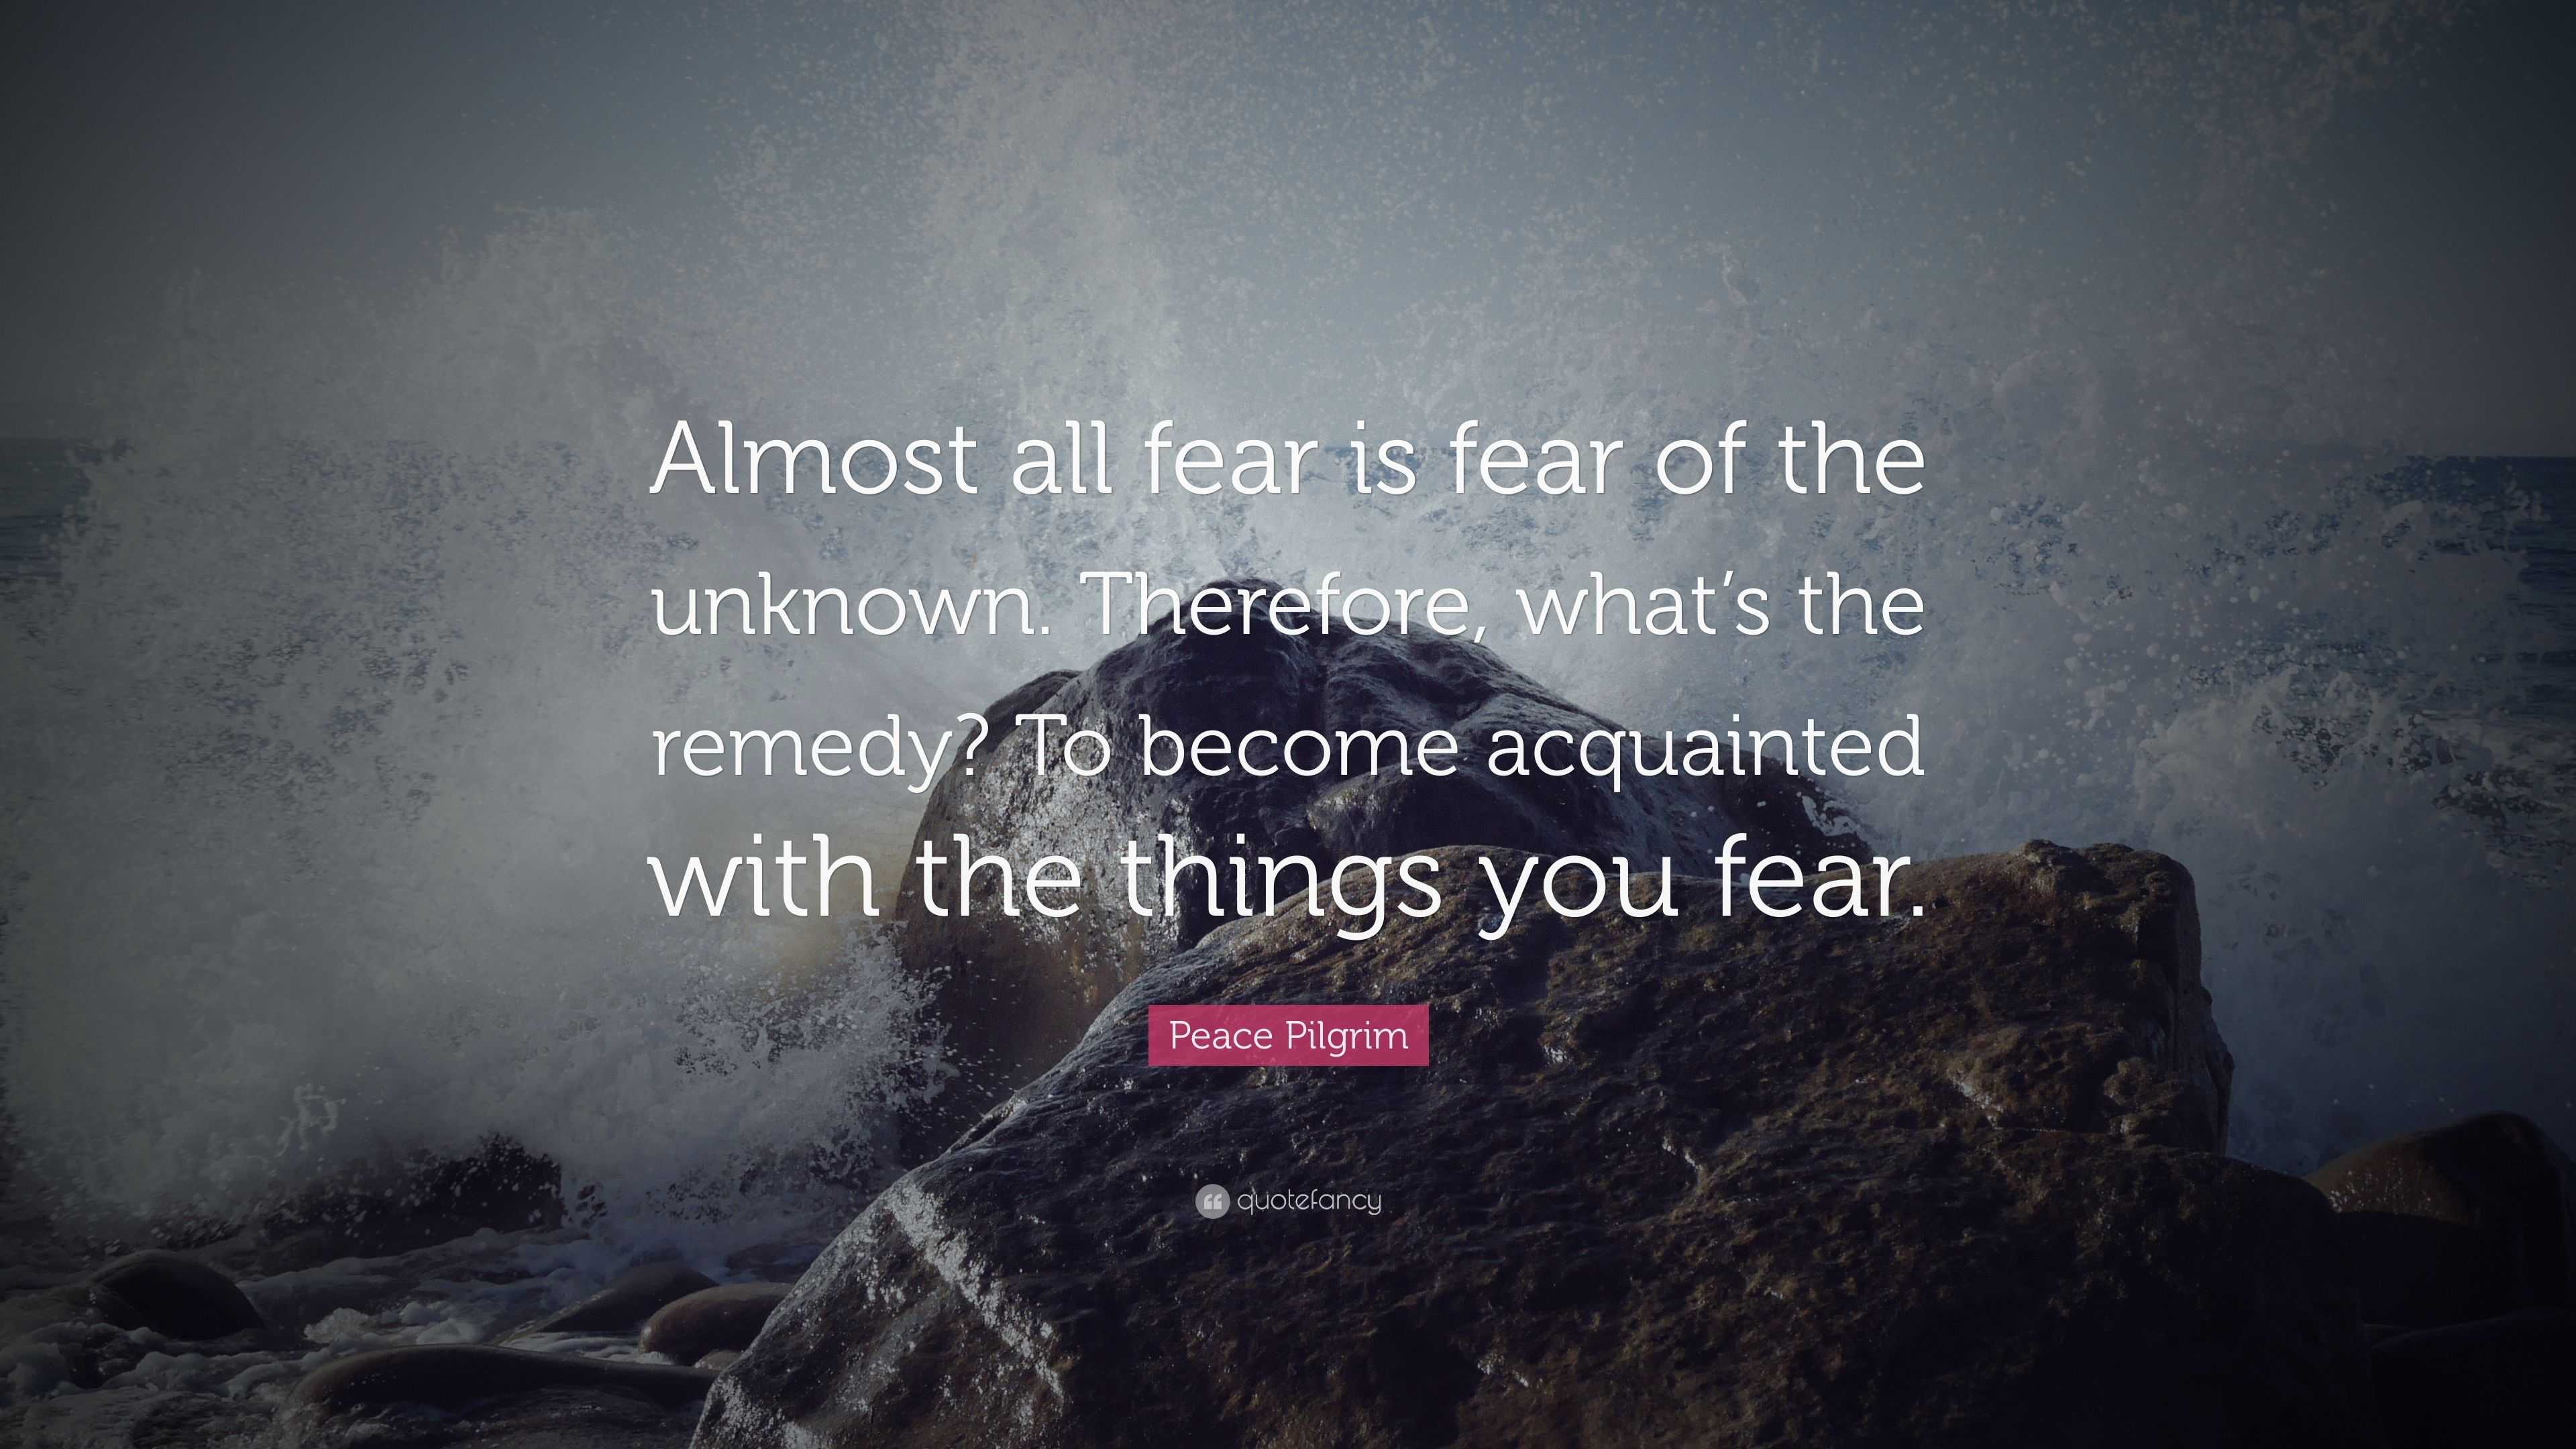 Peace Pilgrim Quote: “Almost all fear is fear of the unknown. Therefore ...